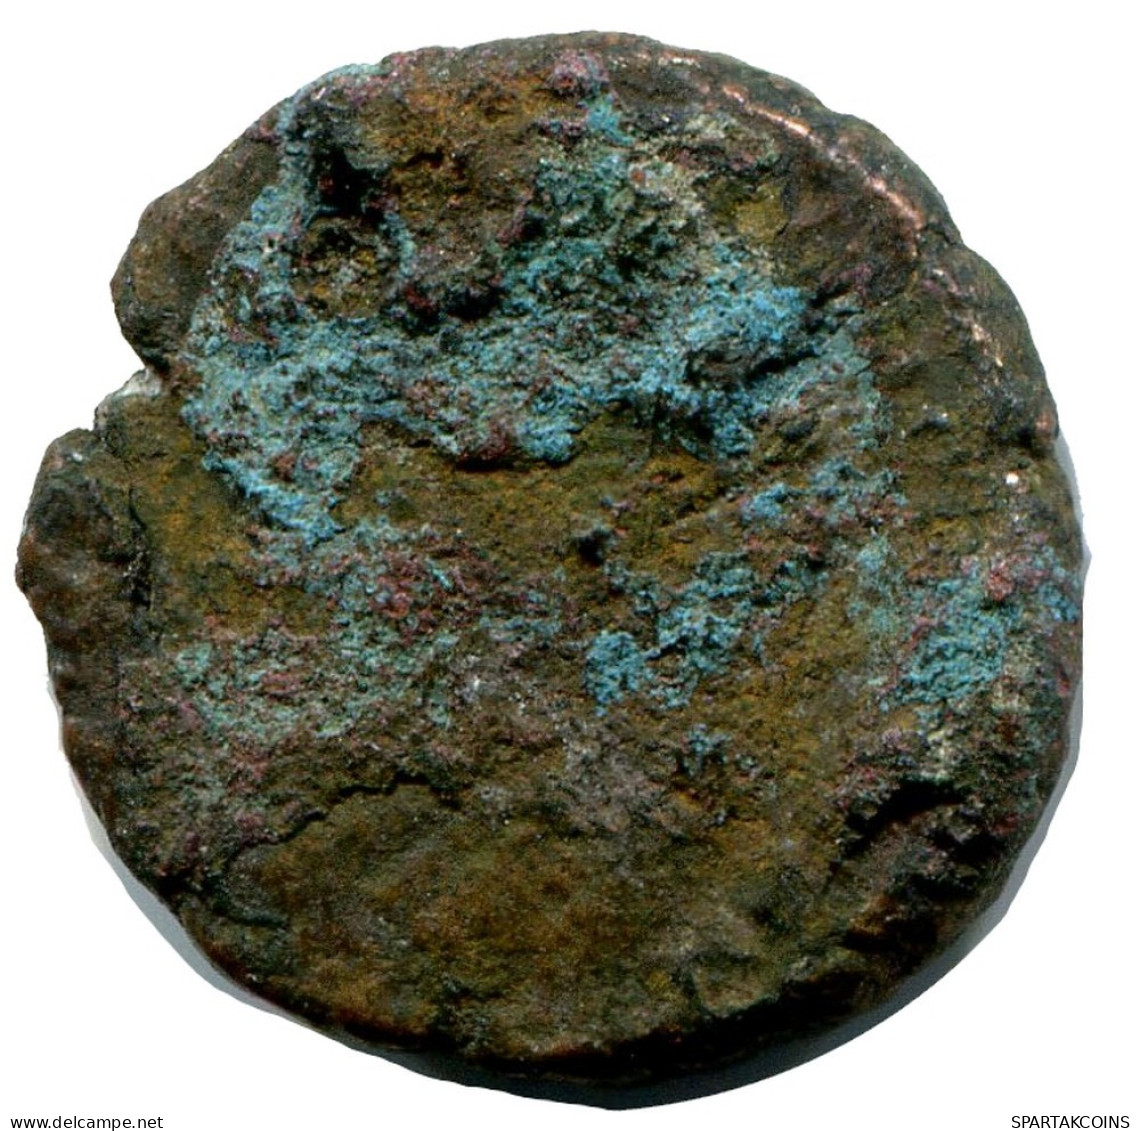 ROMAN Coin MINTED IN ALEKSANDRIA FOUND IN IHNASYAH HOARD EGYPT #ANC10152.14.D.A - The Christian Empire (307 AD To 363 AD)